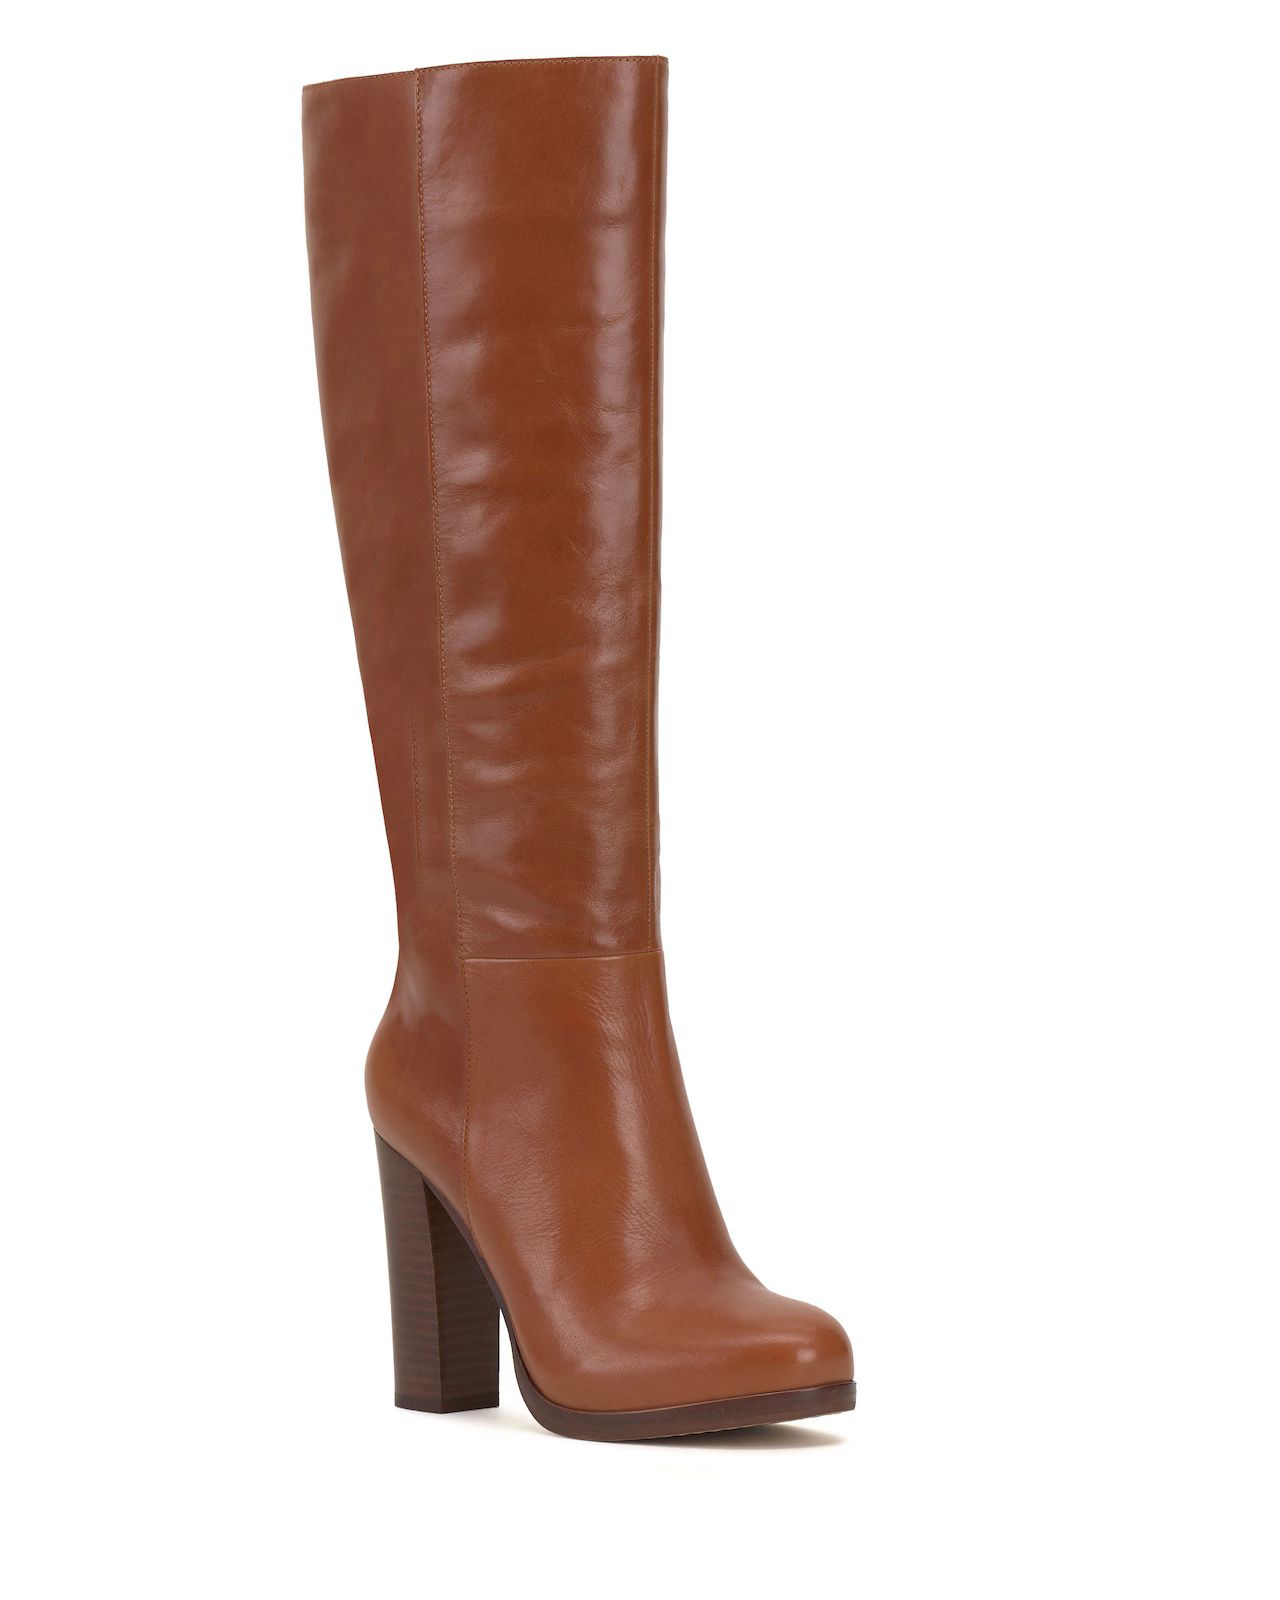 Vince Camuto Crutinie Extra Wide-Calf Boot | Vince Camuto